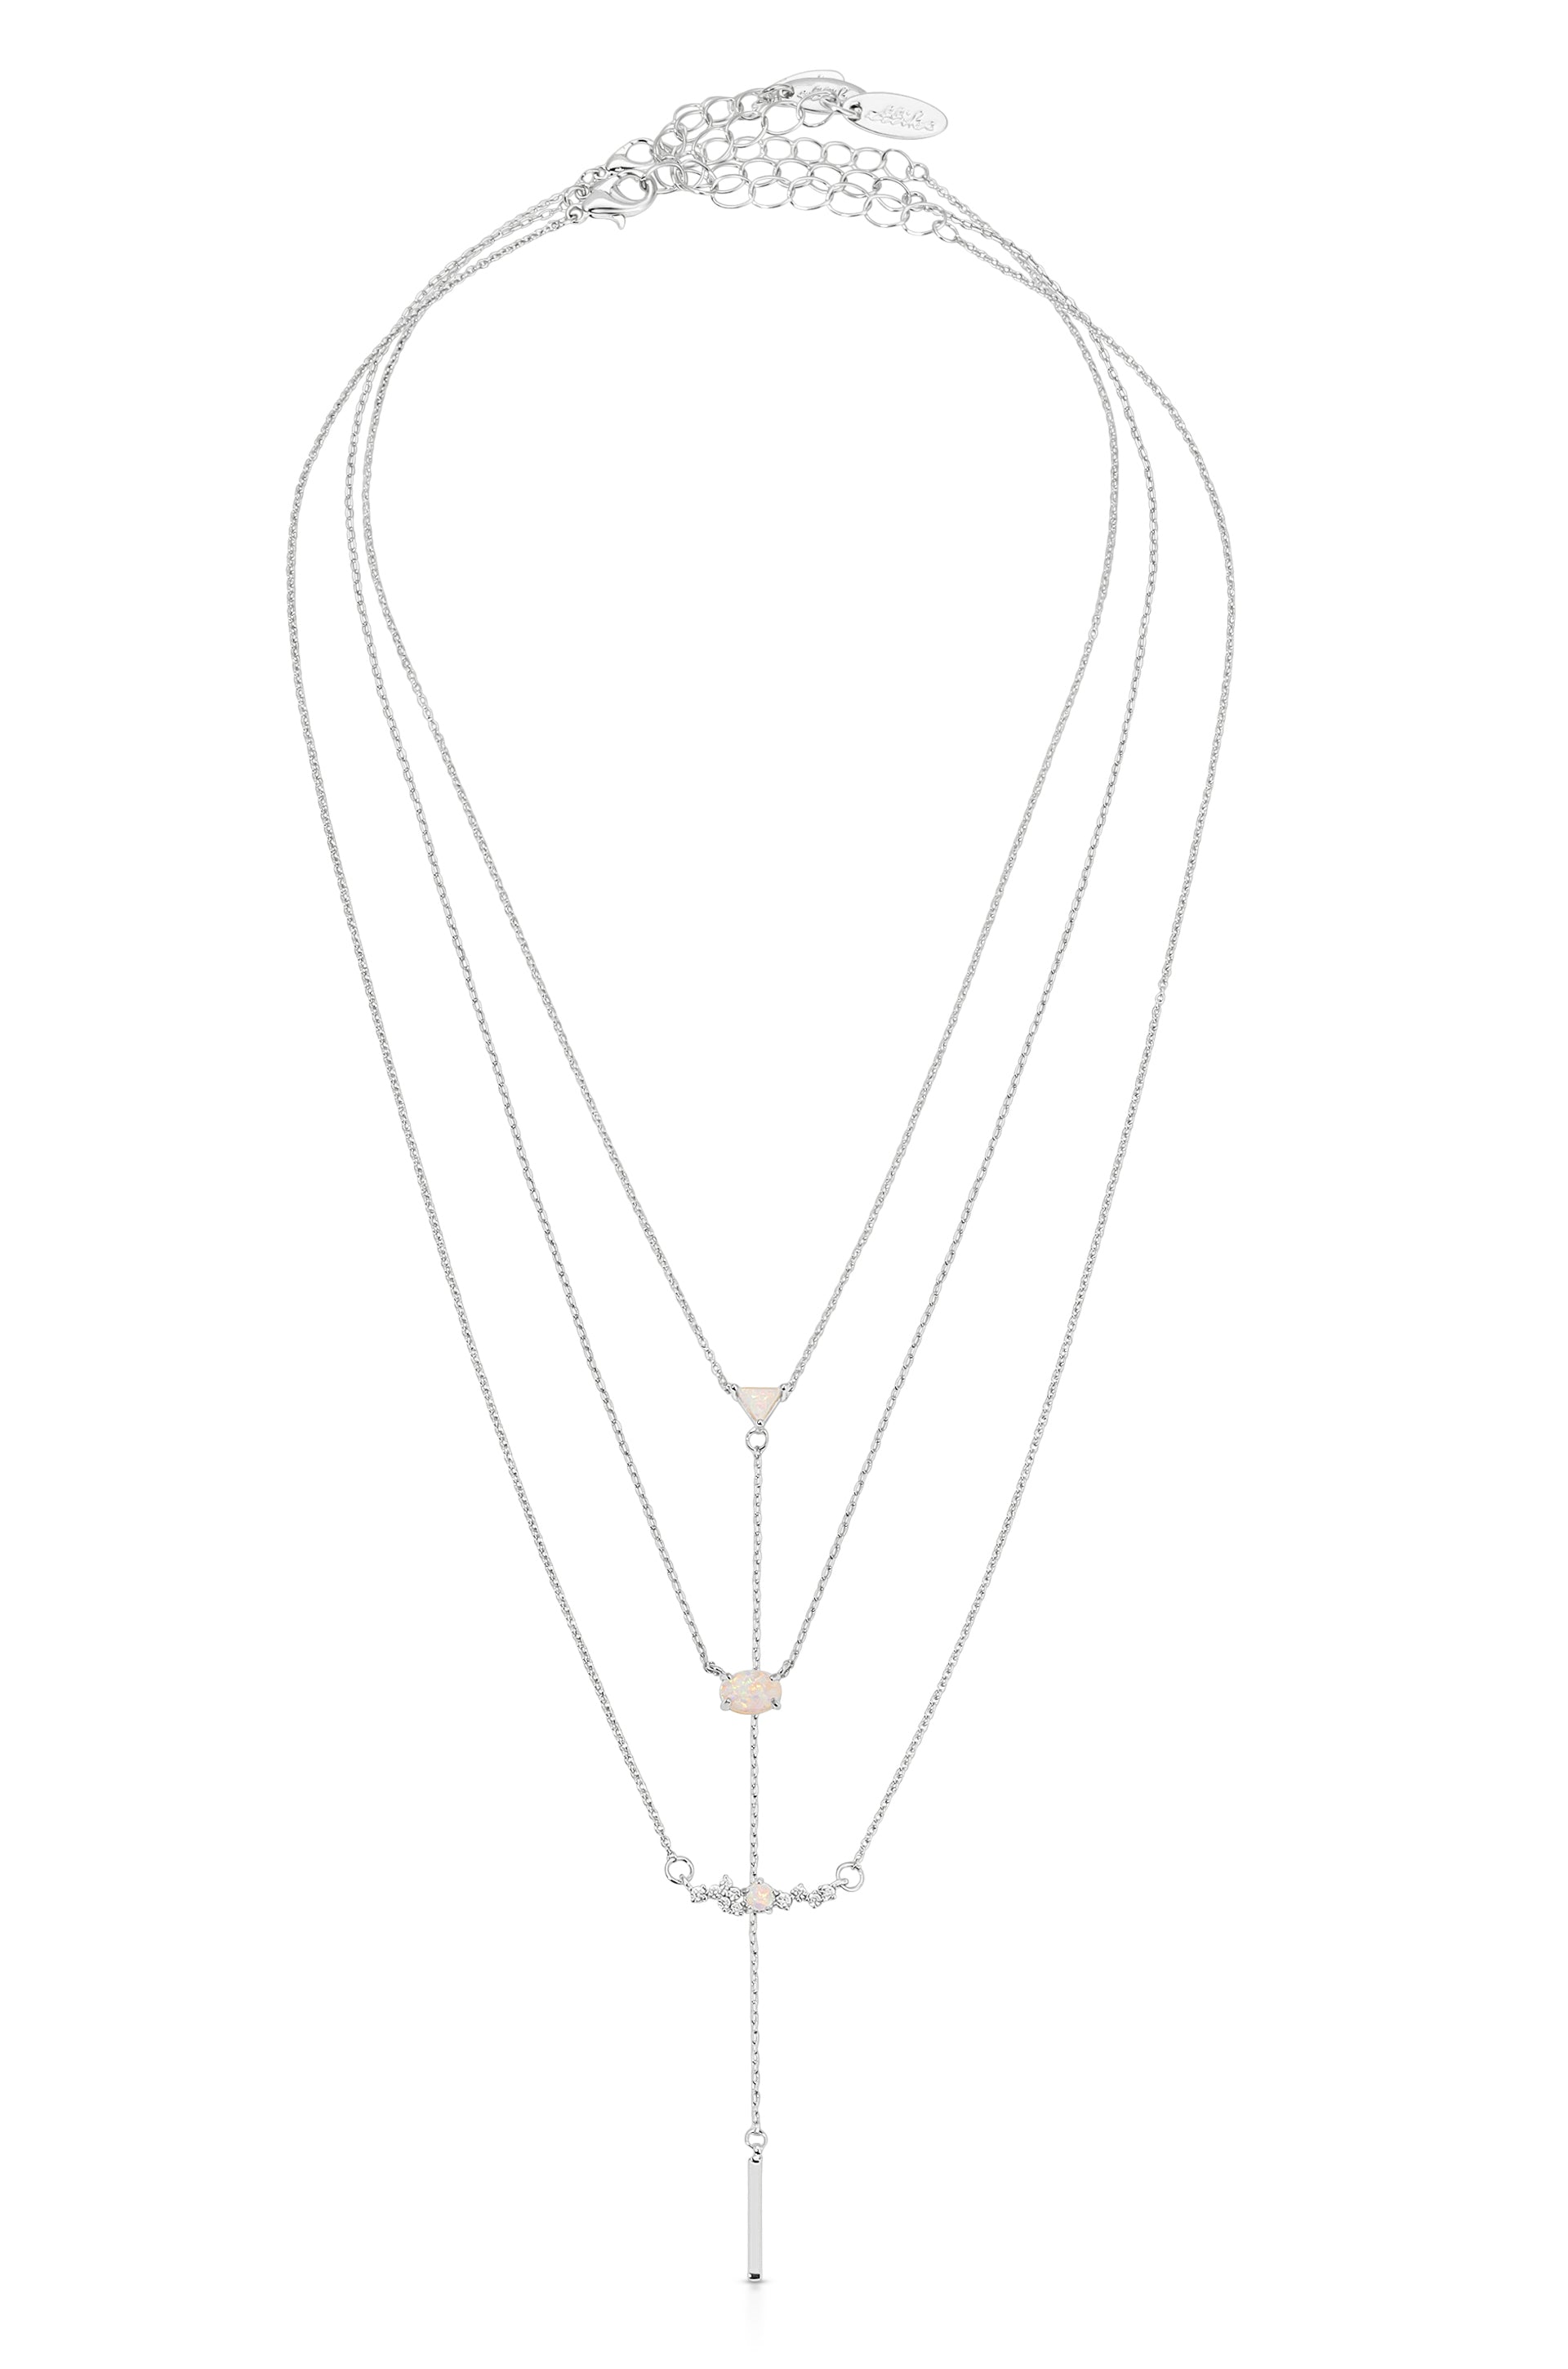 Layered Opal Lariat Necklace Set of 3 in rhodium 5